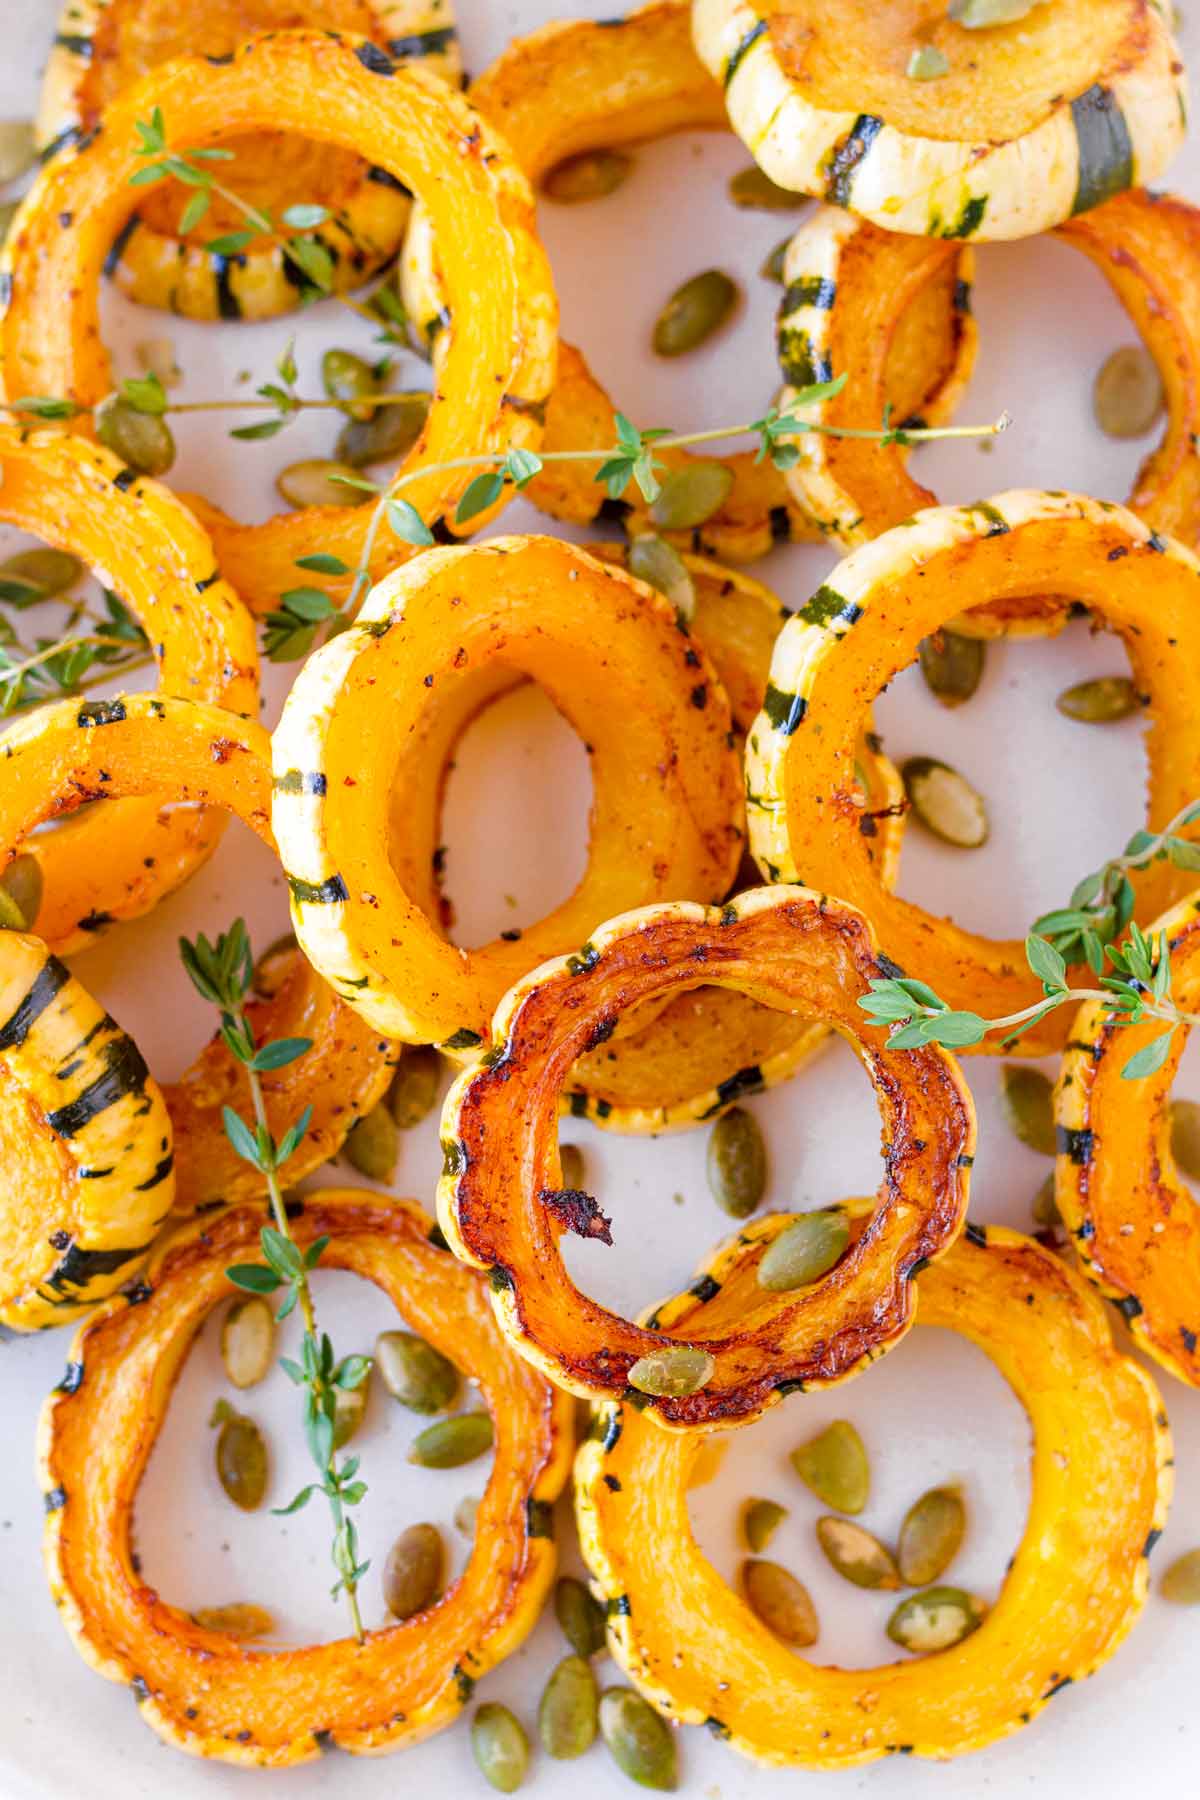 oven roasted squash pieces stacked on top of each other